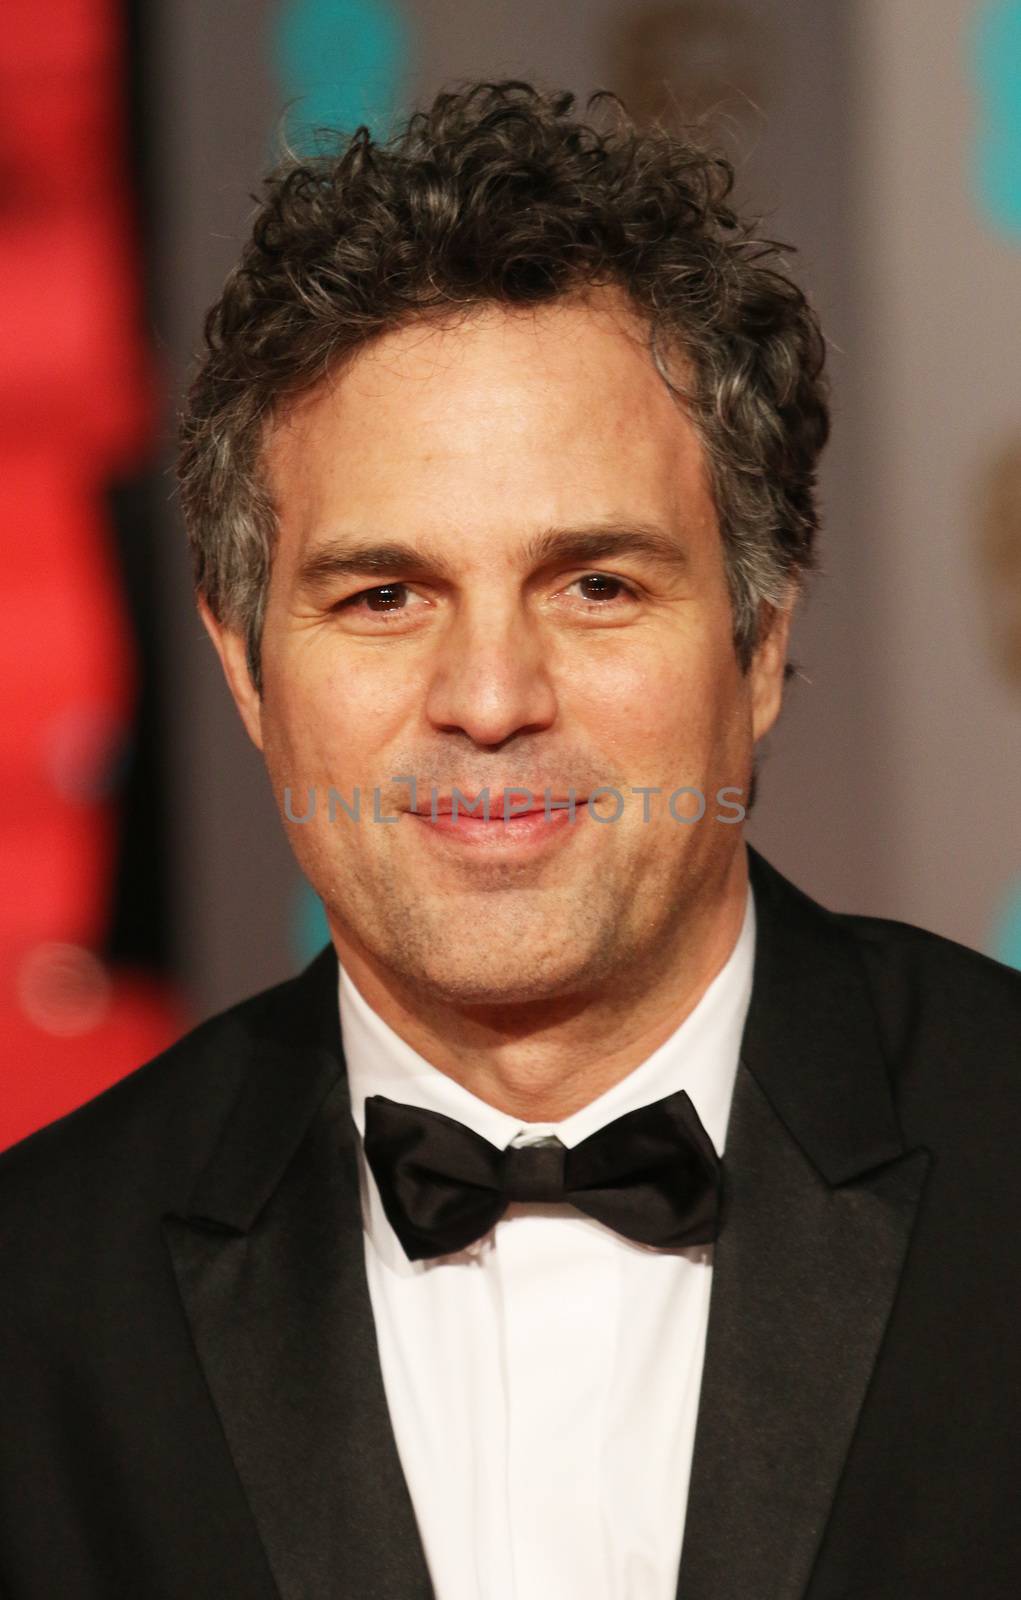 UK, London: American actor Mark Ruffalo poses on the red Carpet at the EE British Academy Film Awards, BAFTA Awards, at the Royal Opera House in London, England, on 14 February 2016.